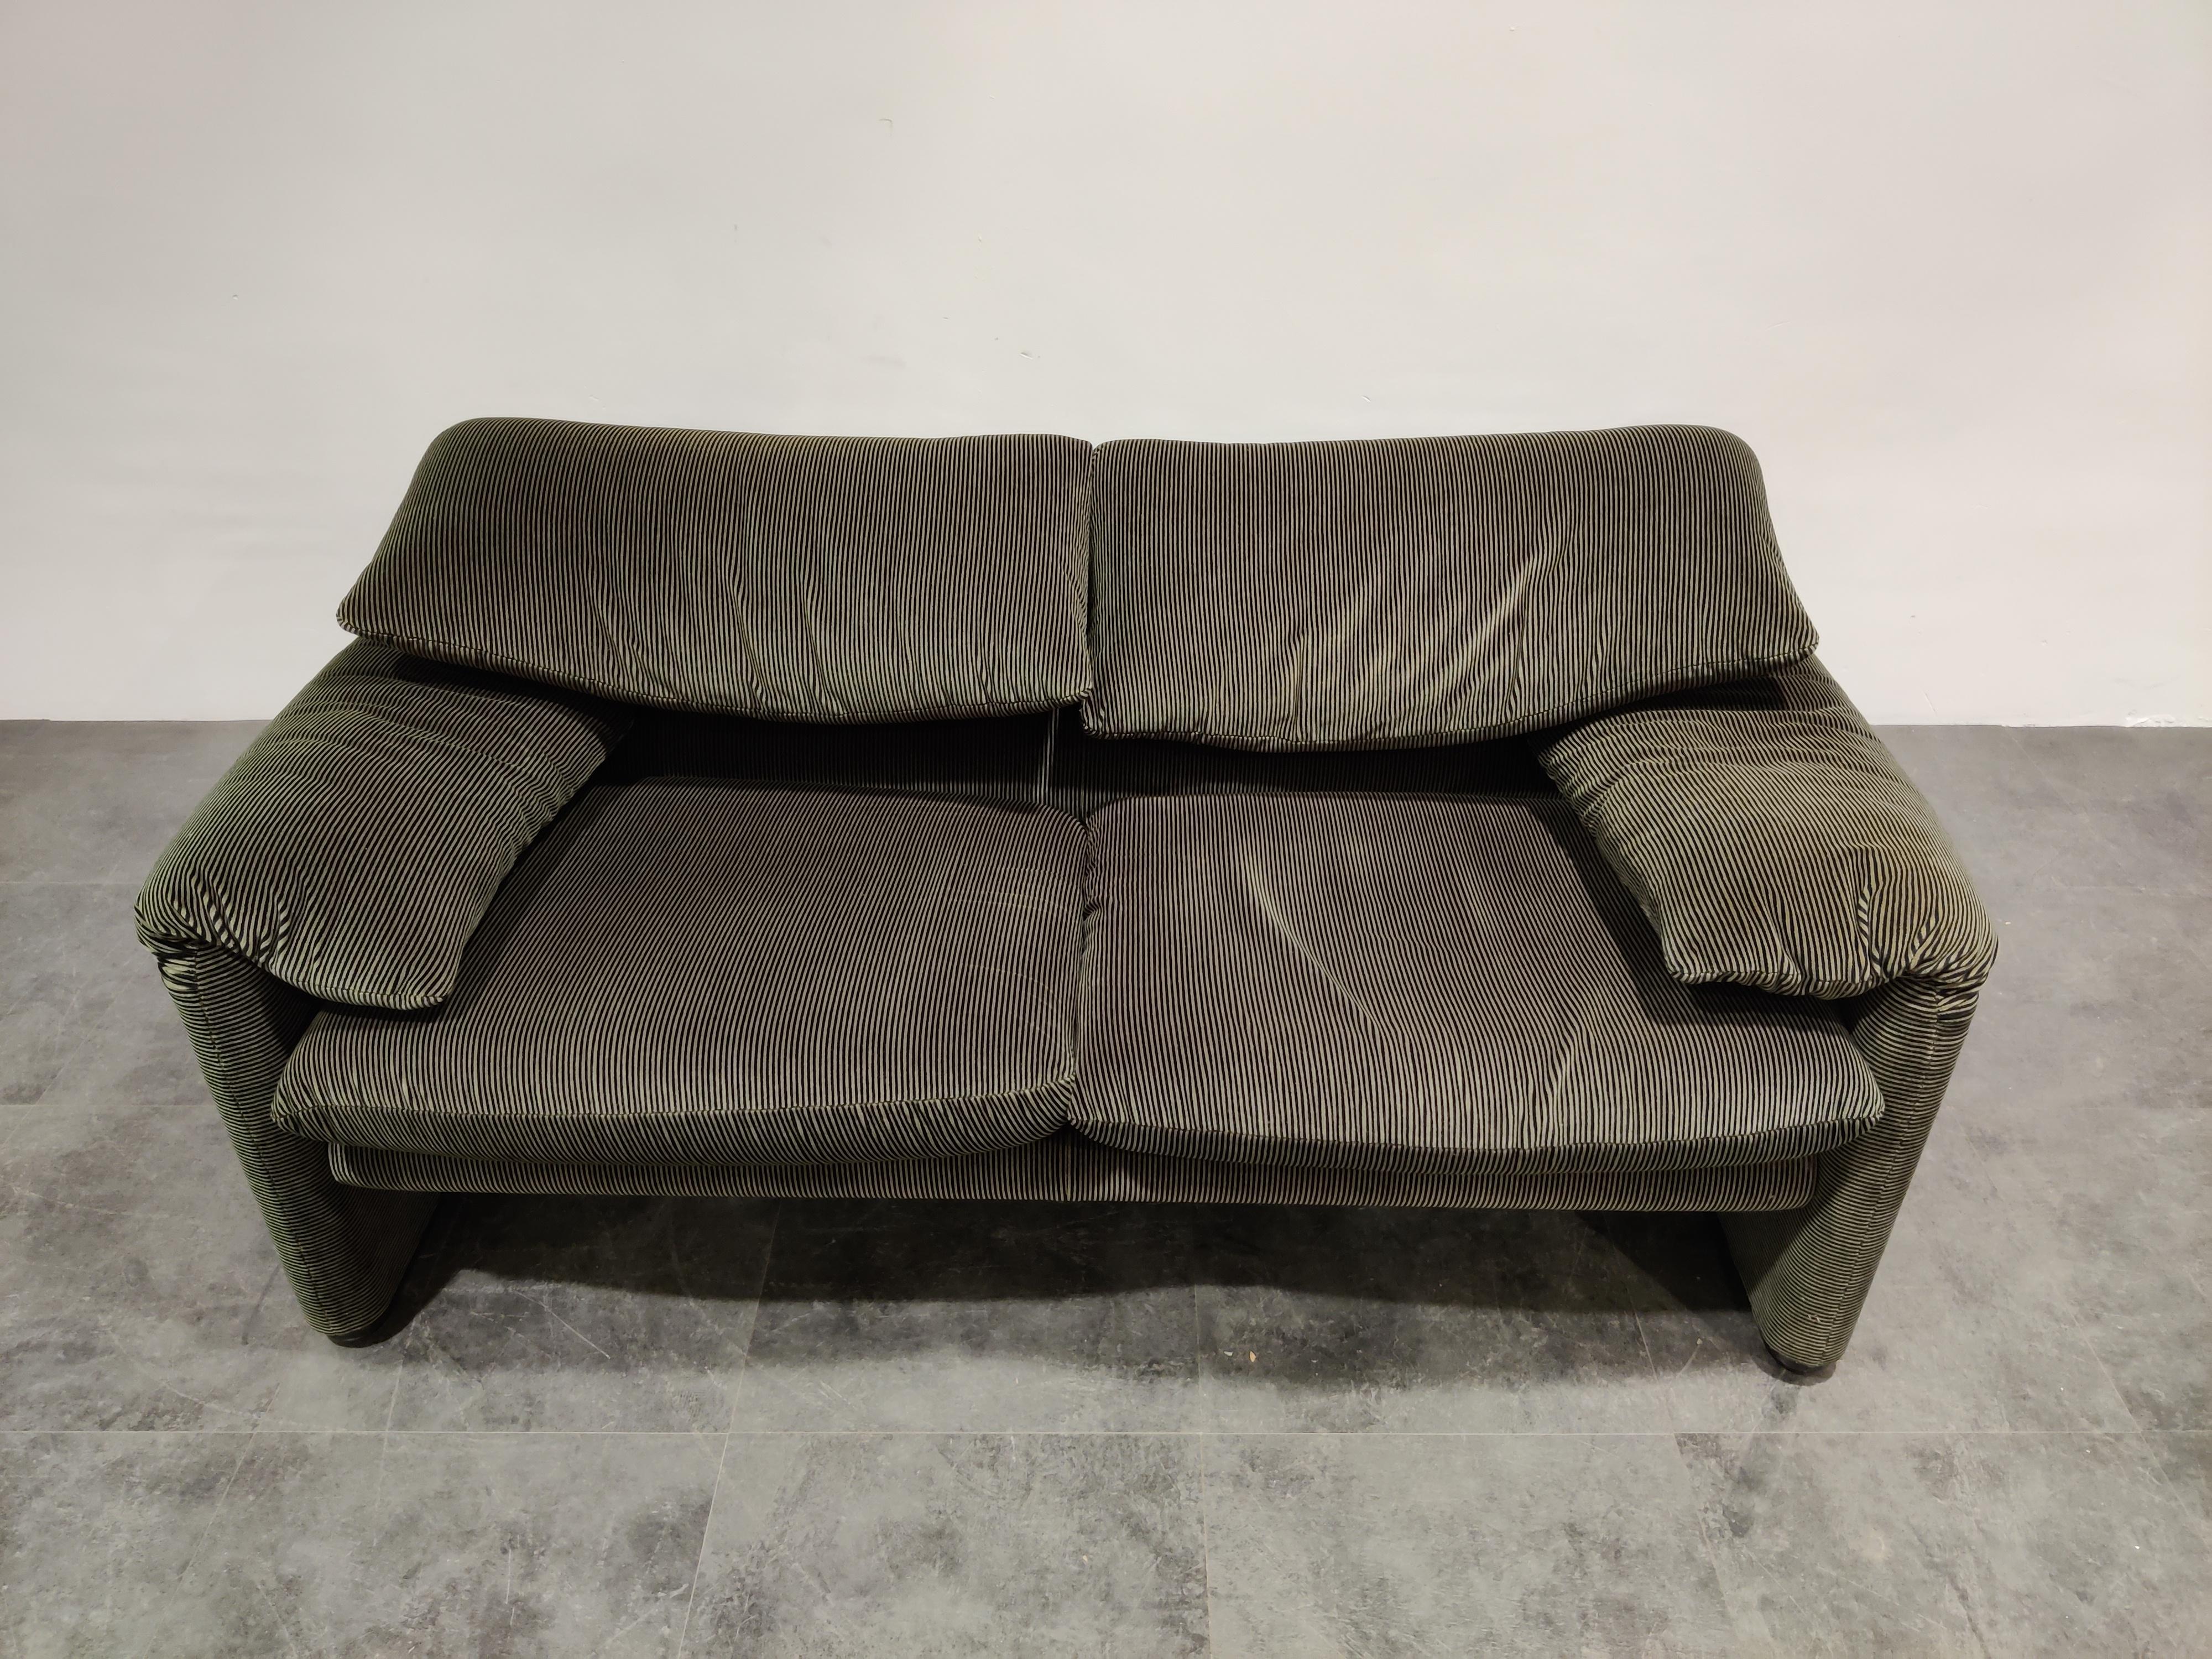 Vintage maralunga sofa designed by Vico Magistretti for Cassina in 1973.

This iconic design sofa is upholstered in dark green/grey striped fabric. (you even get extra fabric for the sofa should it need repairs in the future)

The backrests are